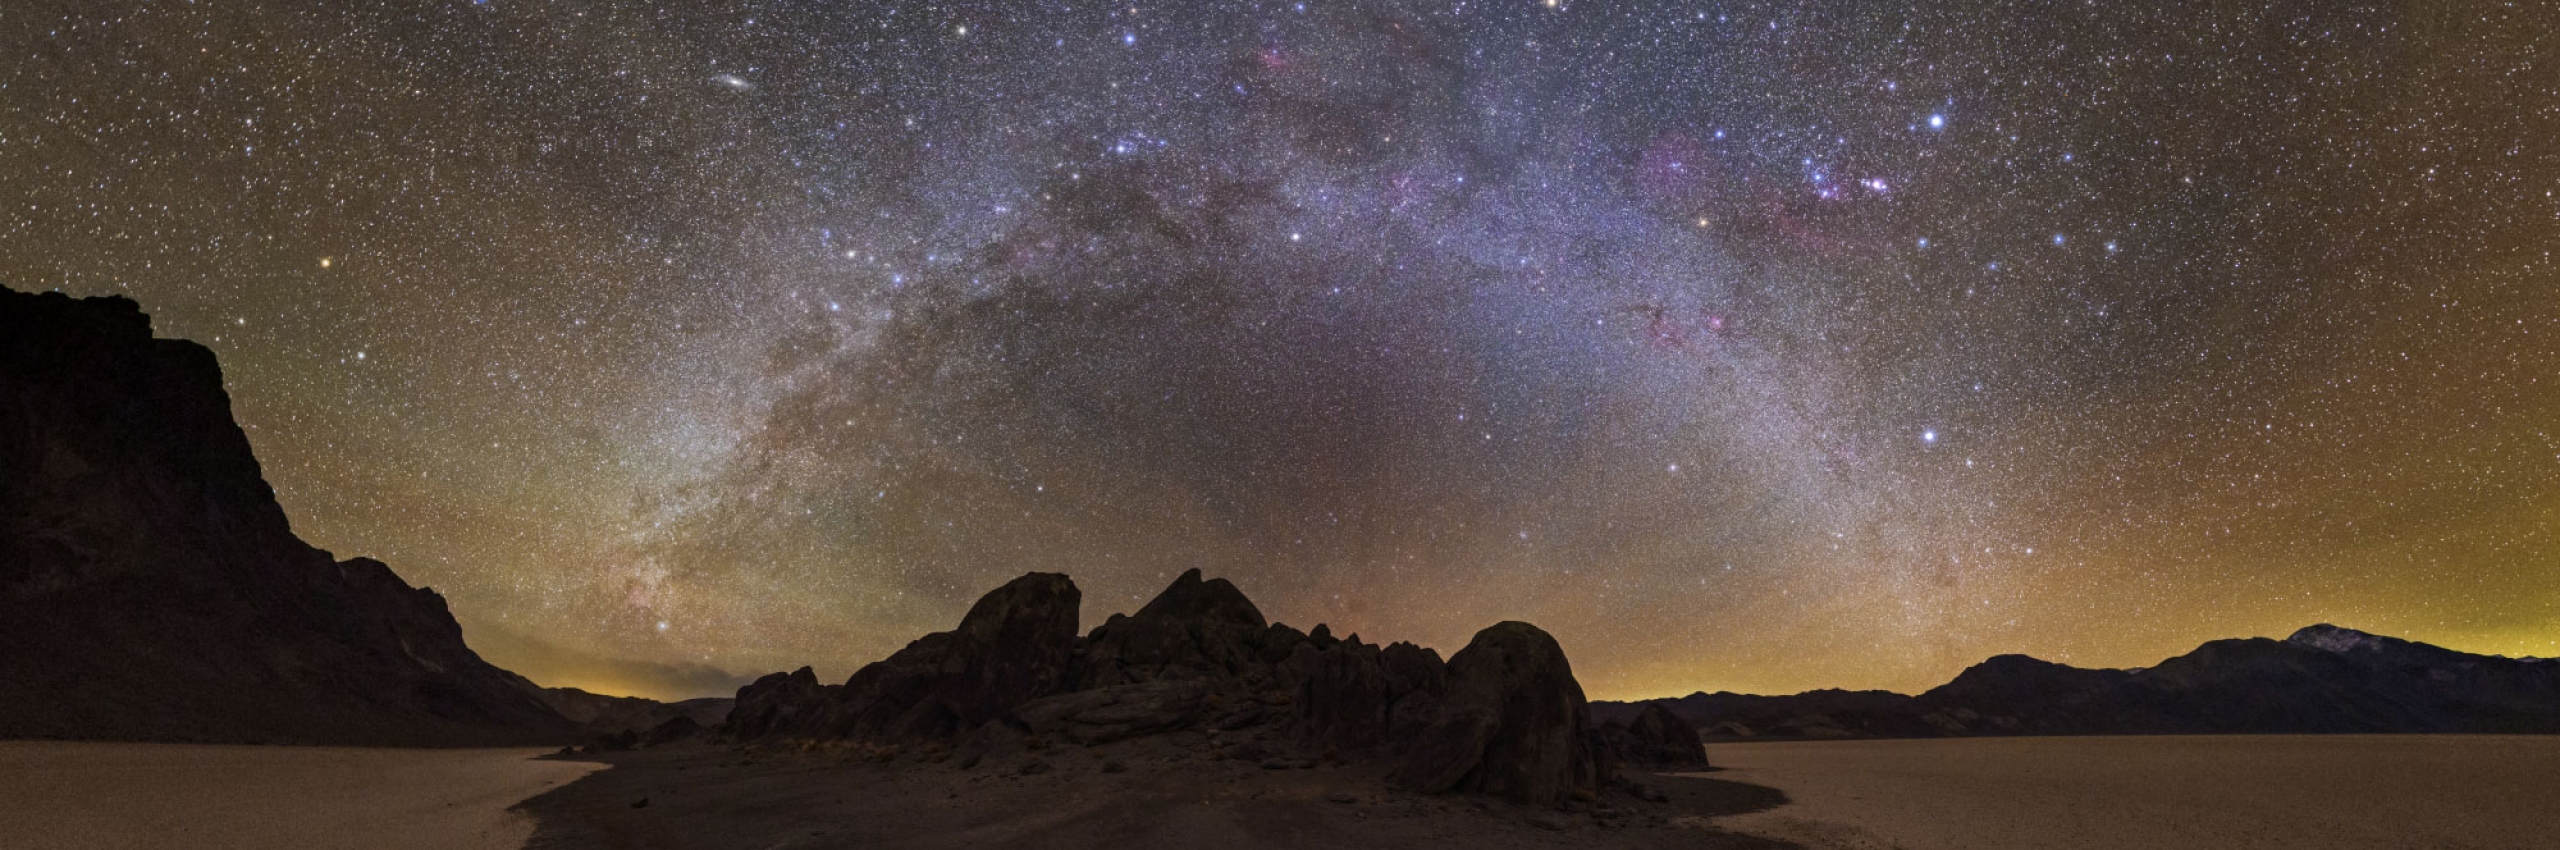 A photo highlighting stars in a twinkling Milky Way with rocky outcroppings below.